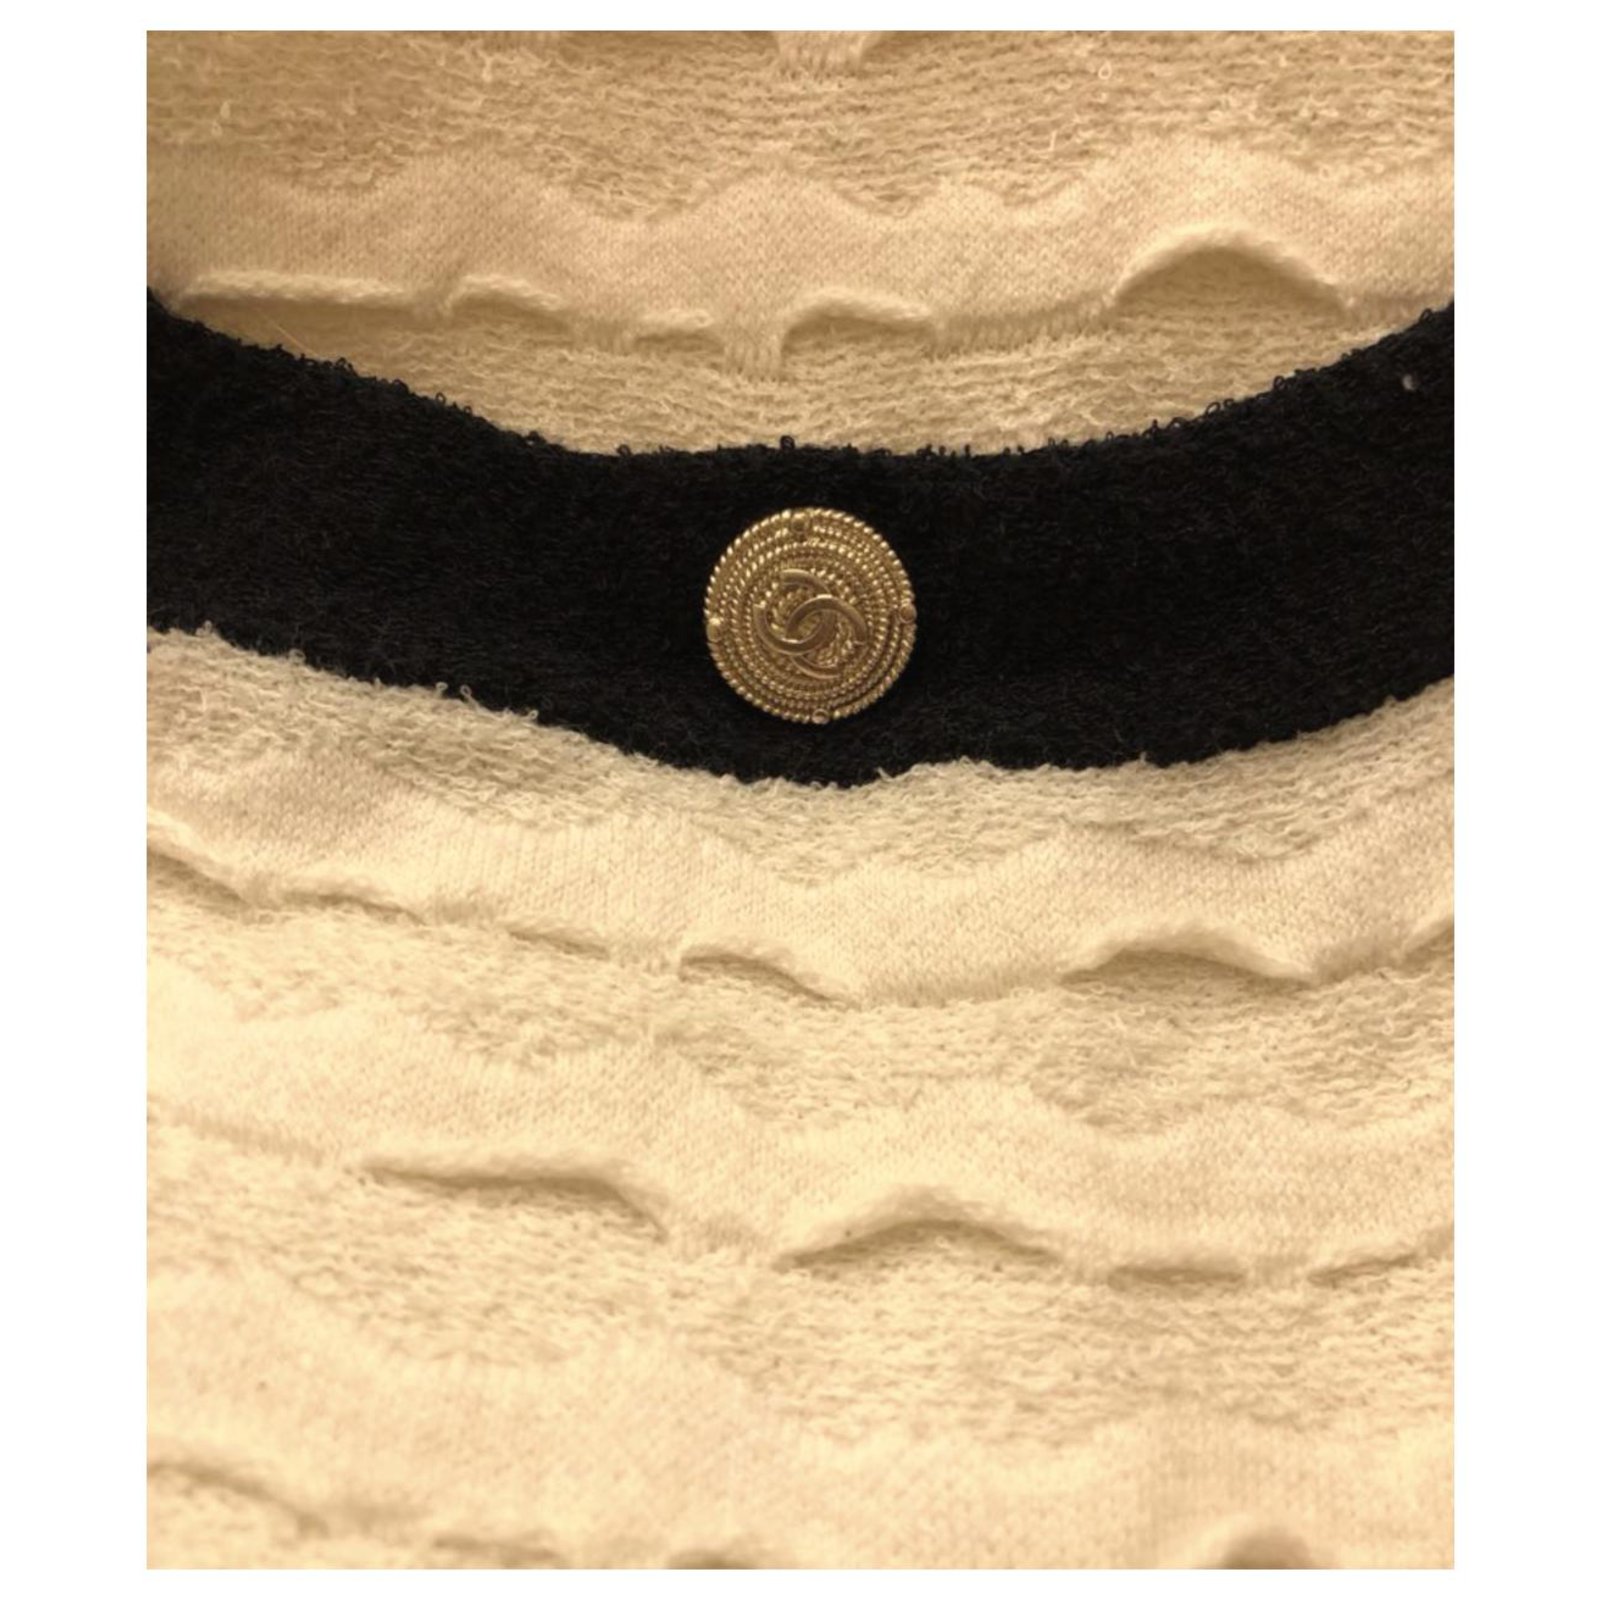 Chanel Black and white knit dress